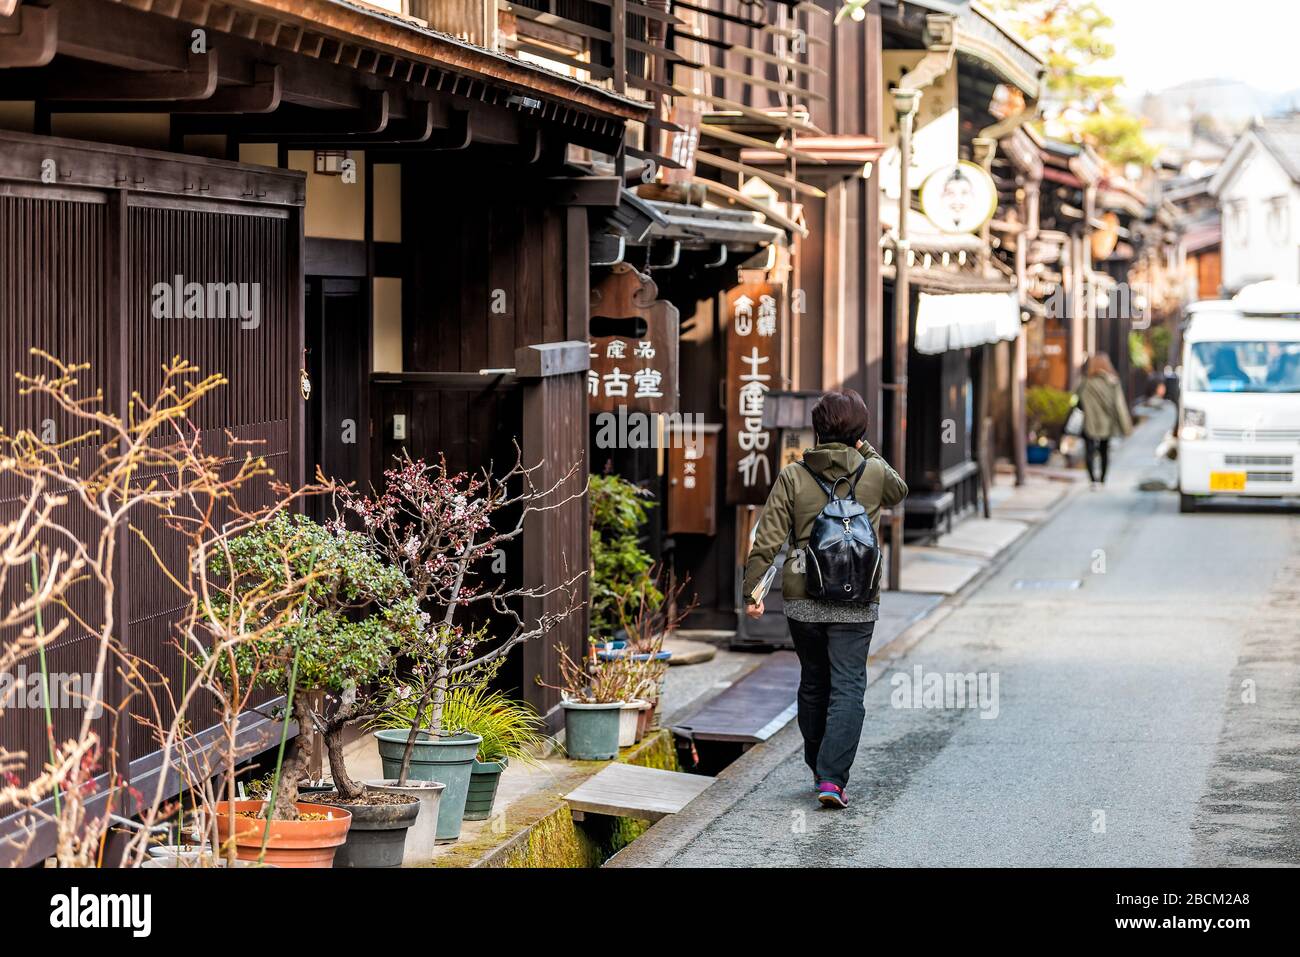 Takayama, Japan - April 9, 2019: Gifu prefecture in Japan with traditional wooden machiya residential houses architecture with people walking on narro Stock Photo